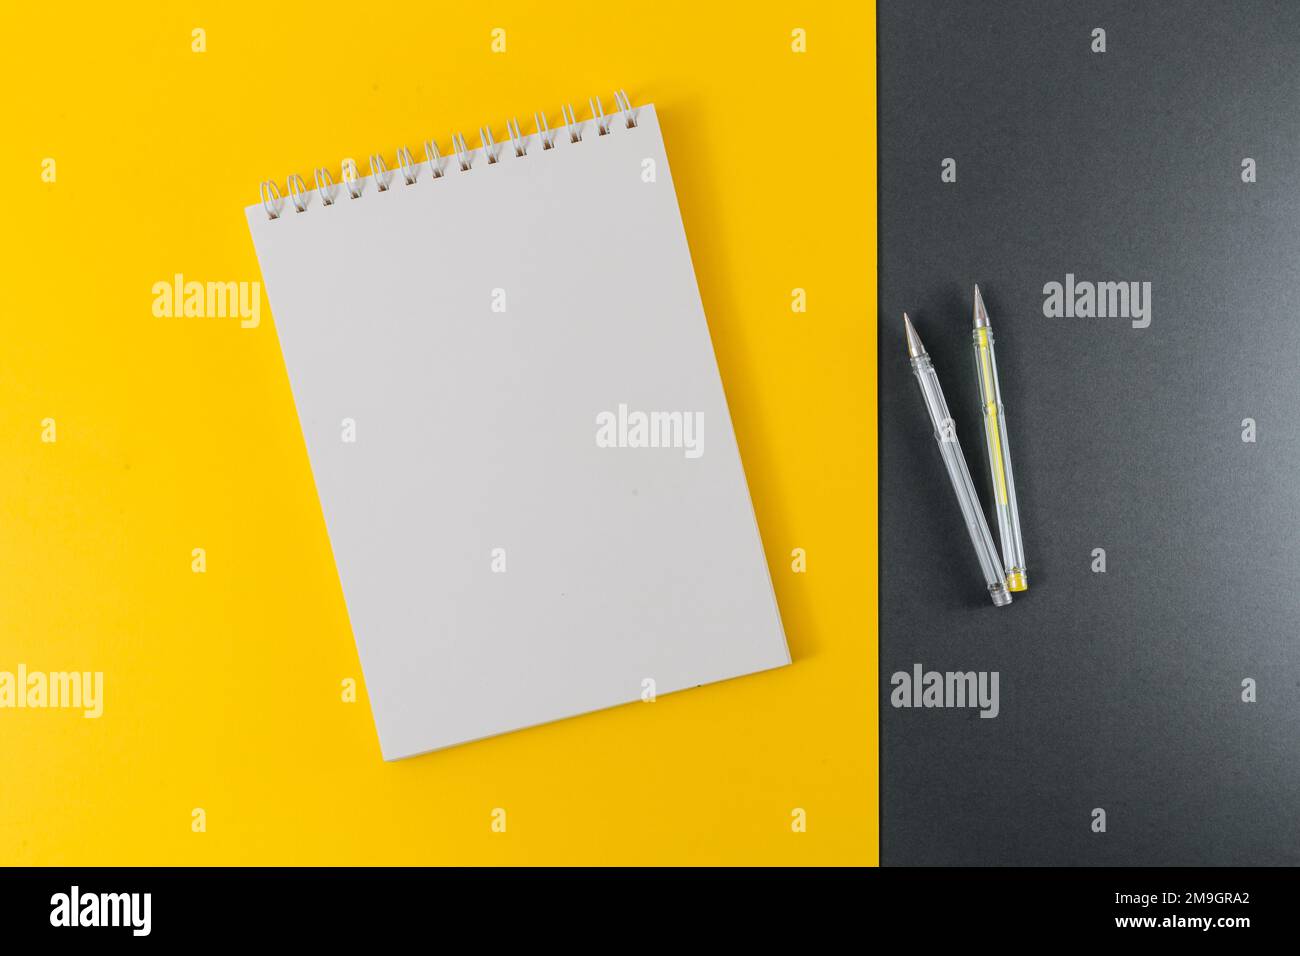 Yellow and gray gel pens with a notepad on a yellow and gray background. Stock Photo